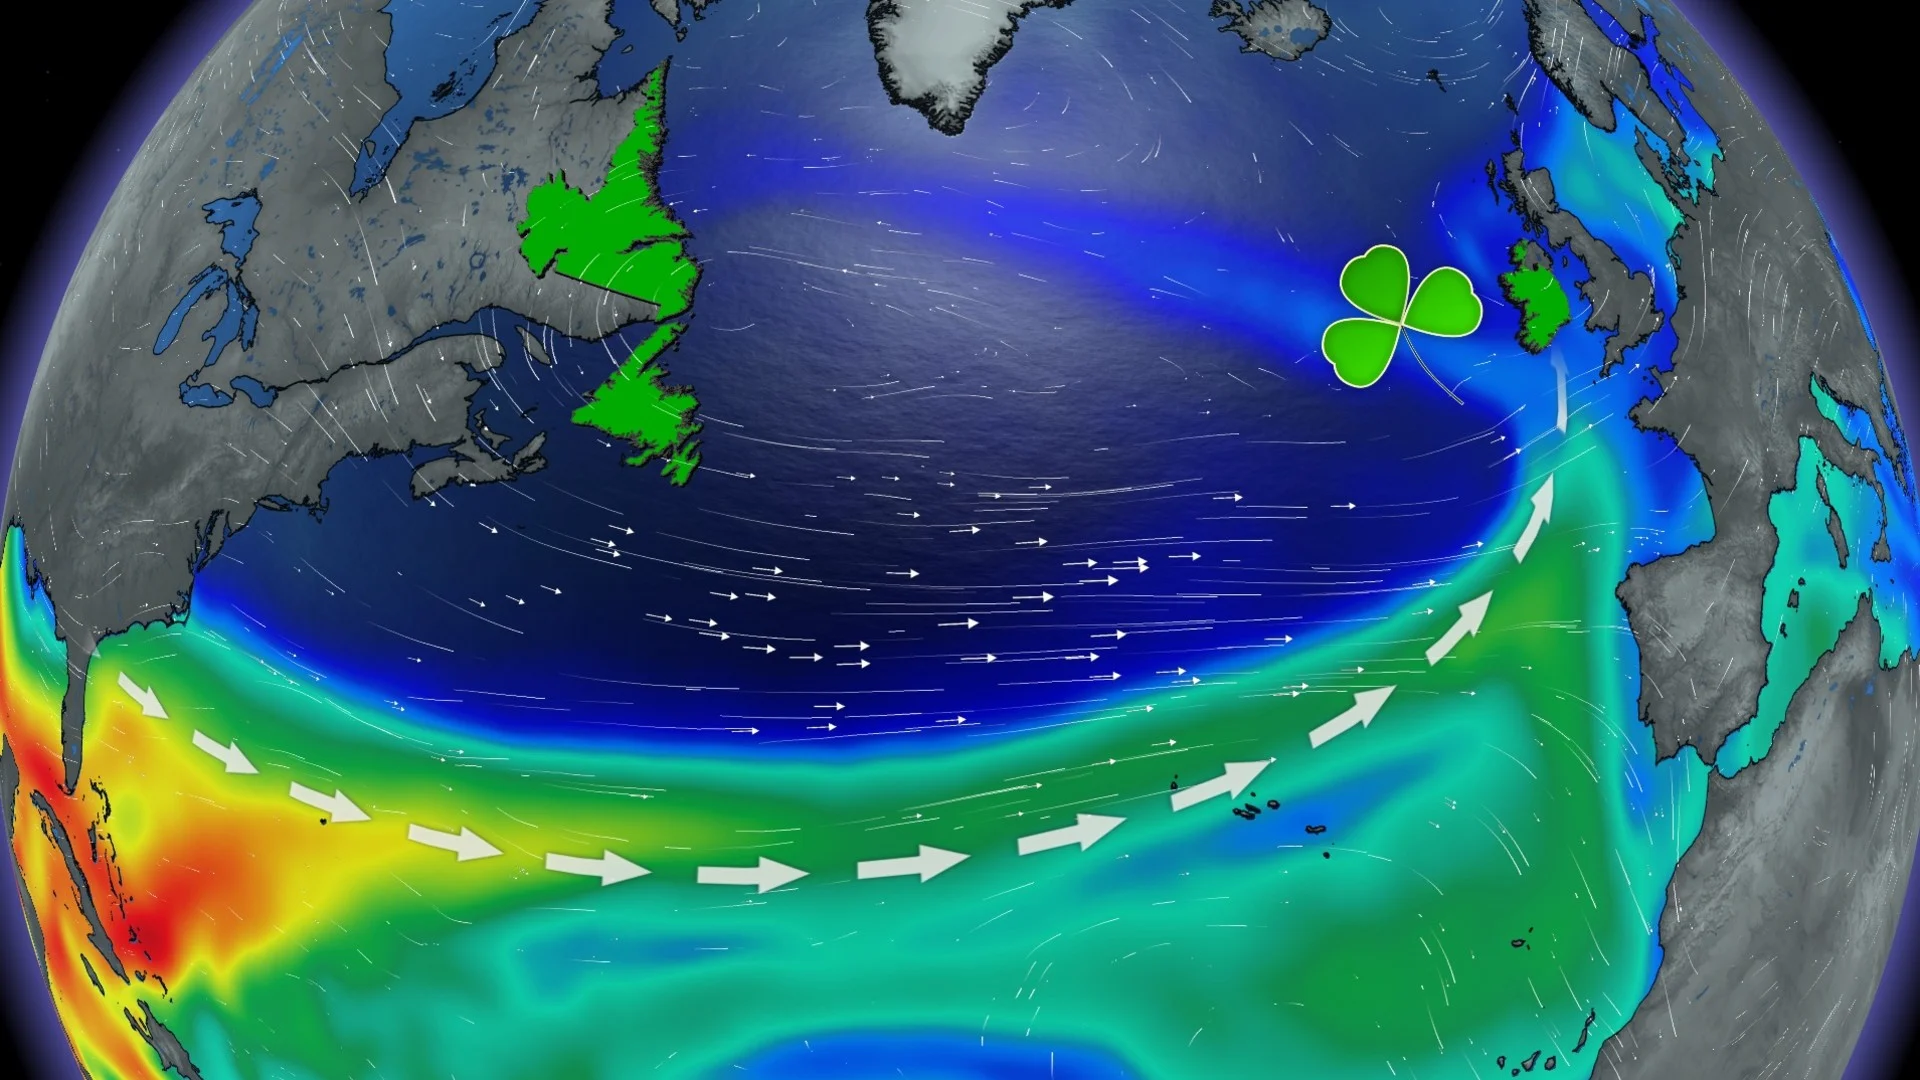 St. Patrick's Day green traditions linked to these weather patterns